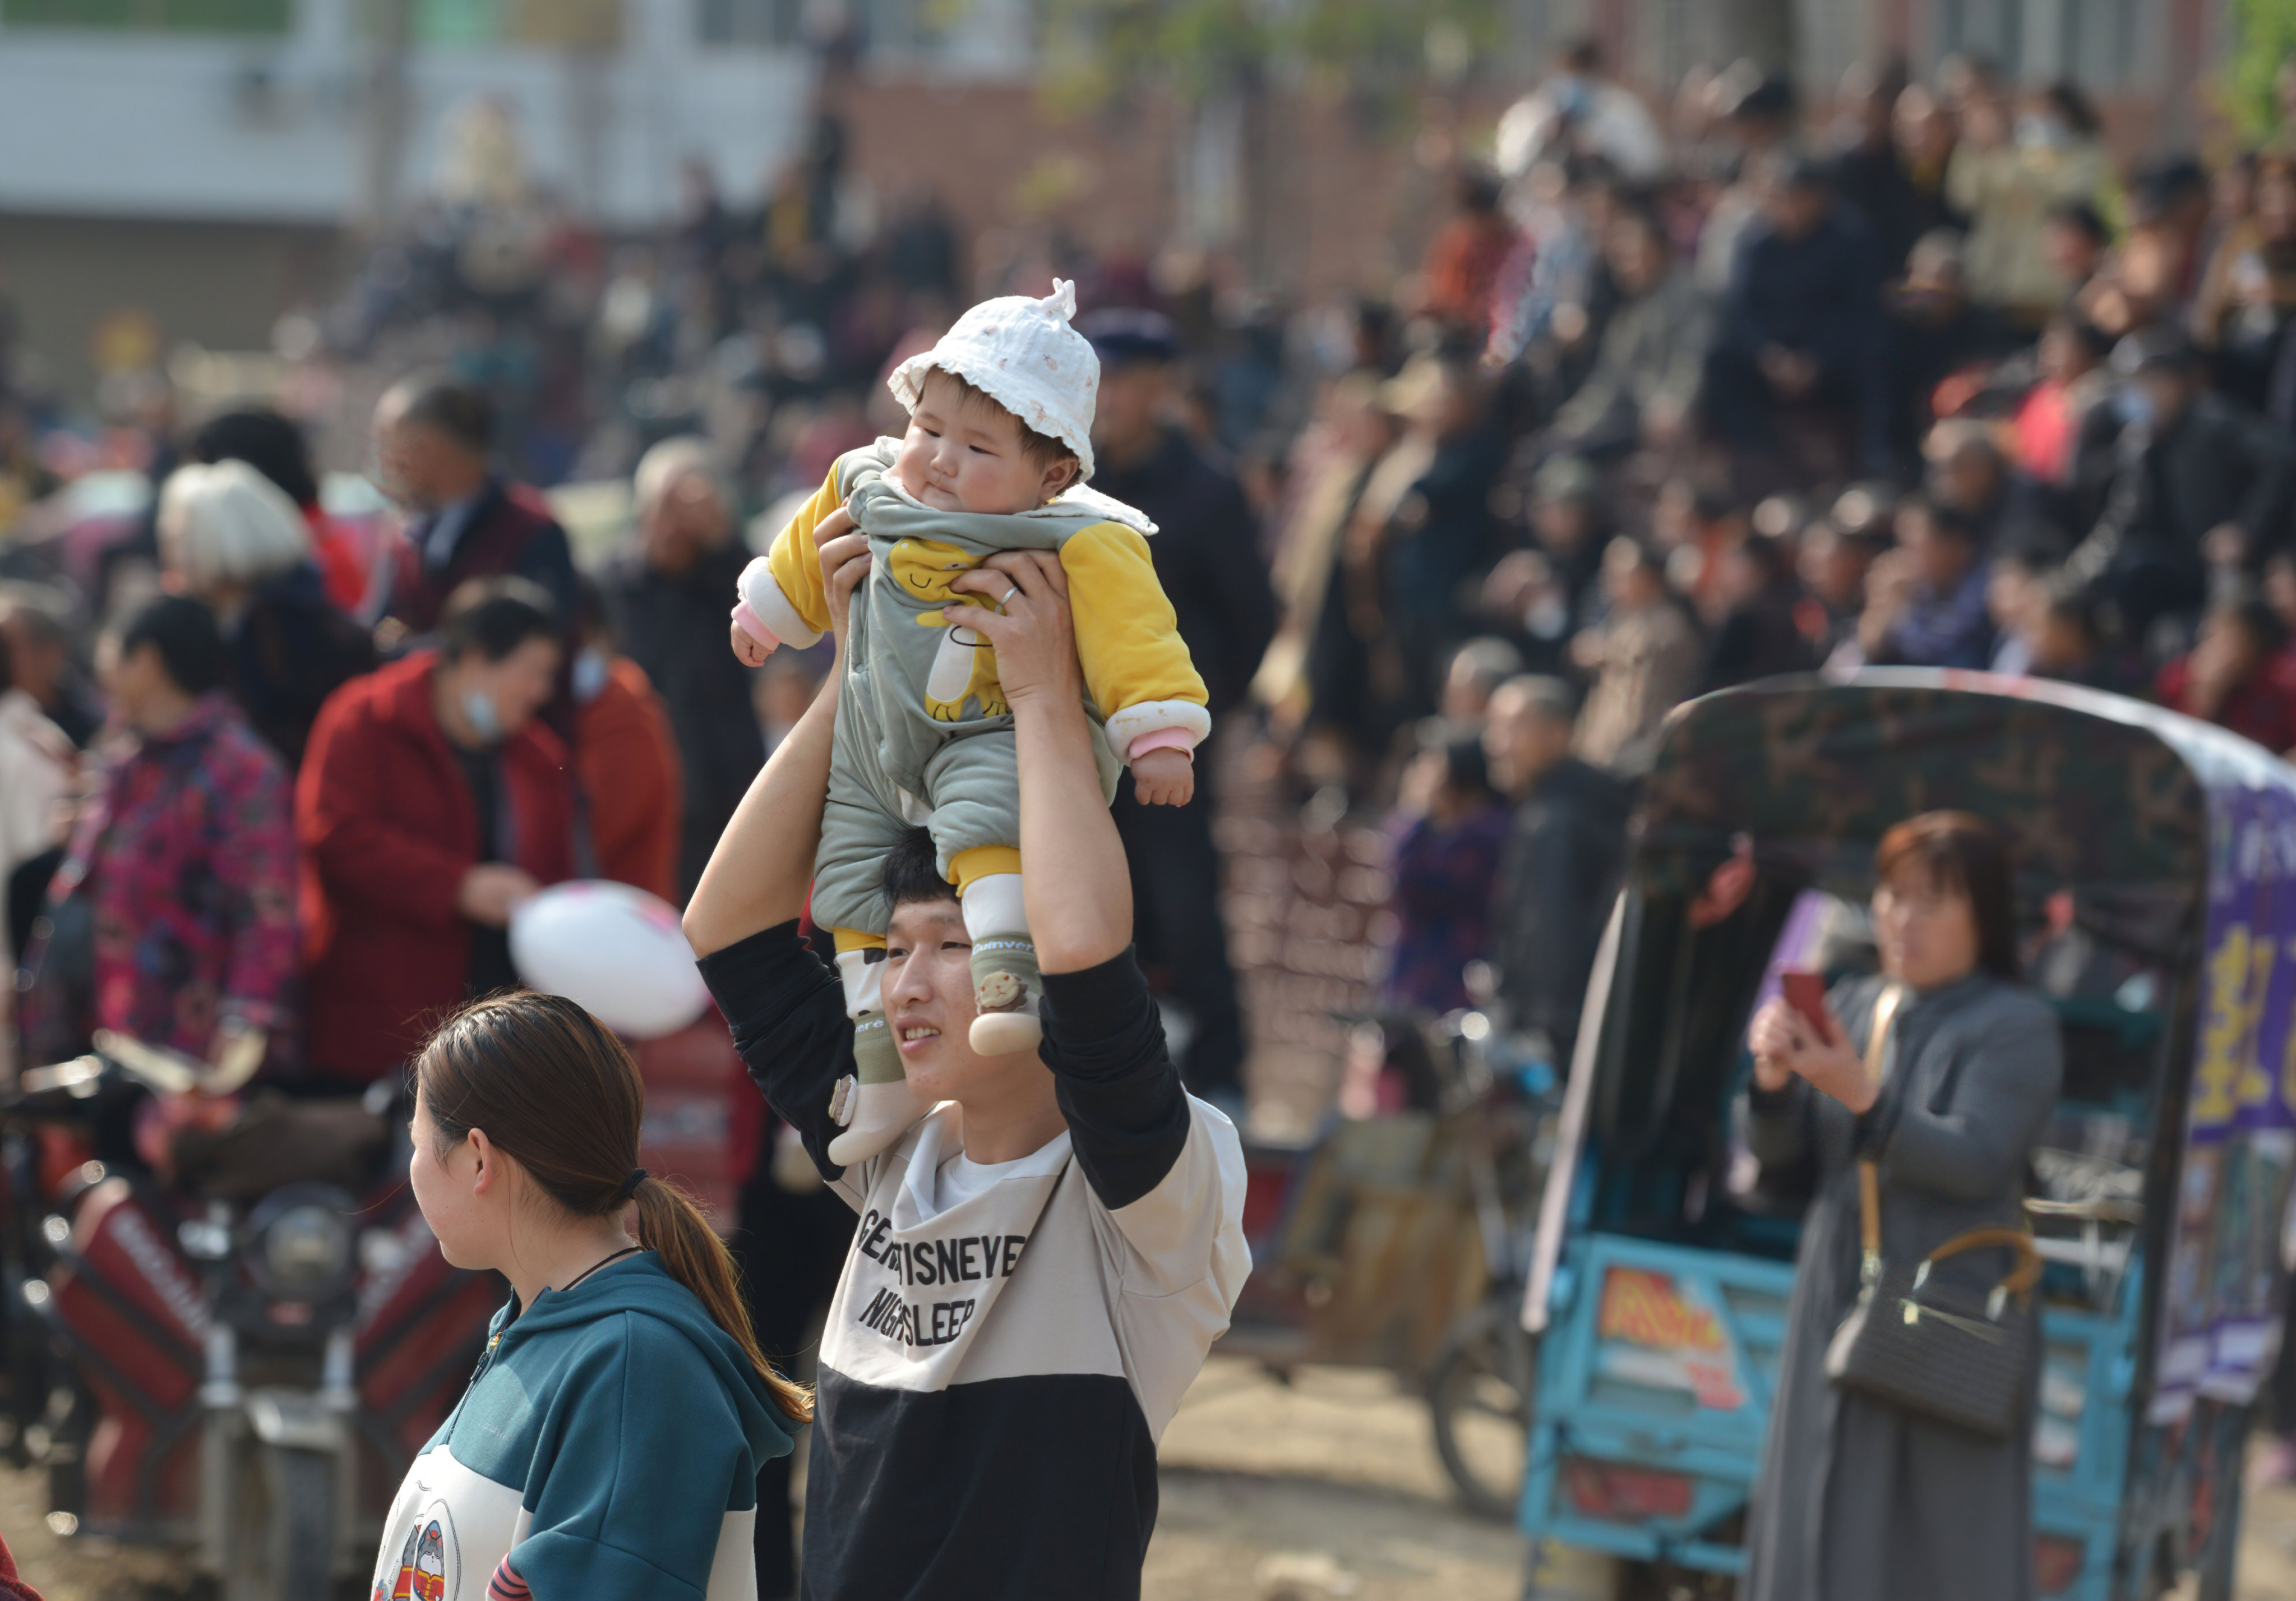 China is in the midst of a population crisis due to a low birth rate and a rapidly ageing society and it has encouraged parents to have up to three children. Photo: Getty Images